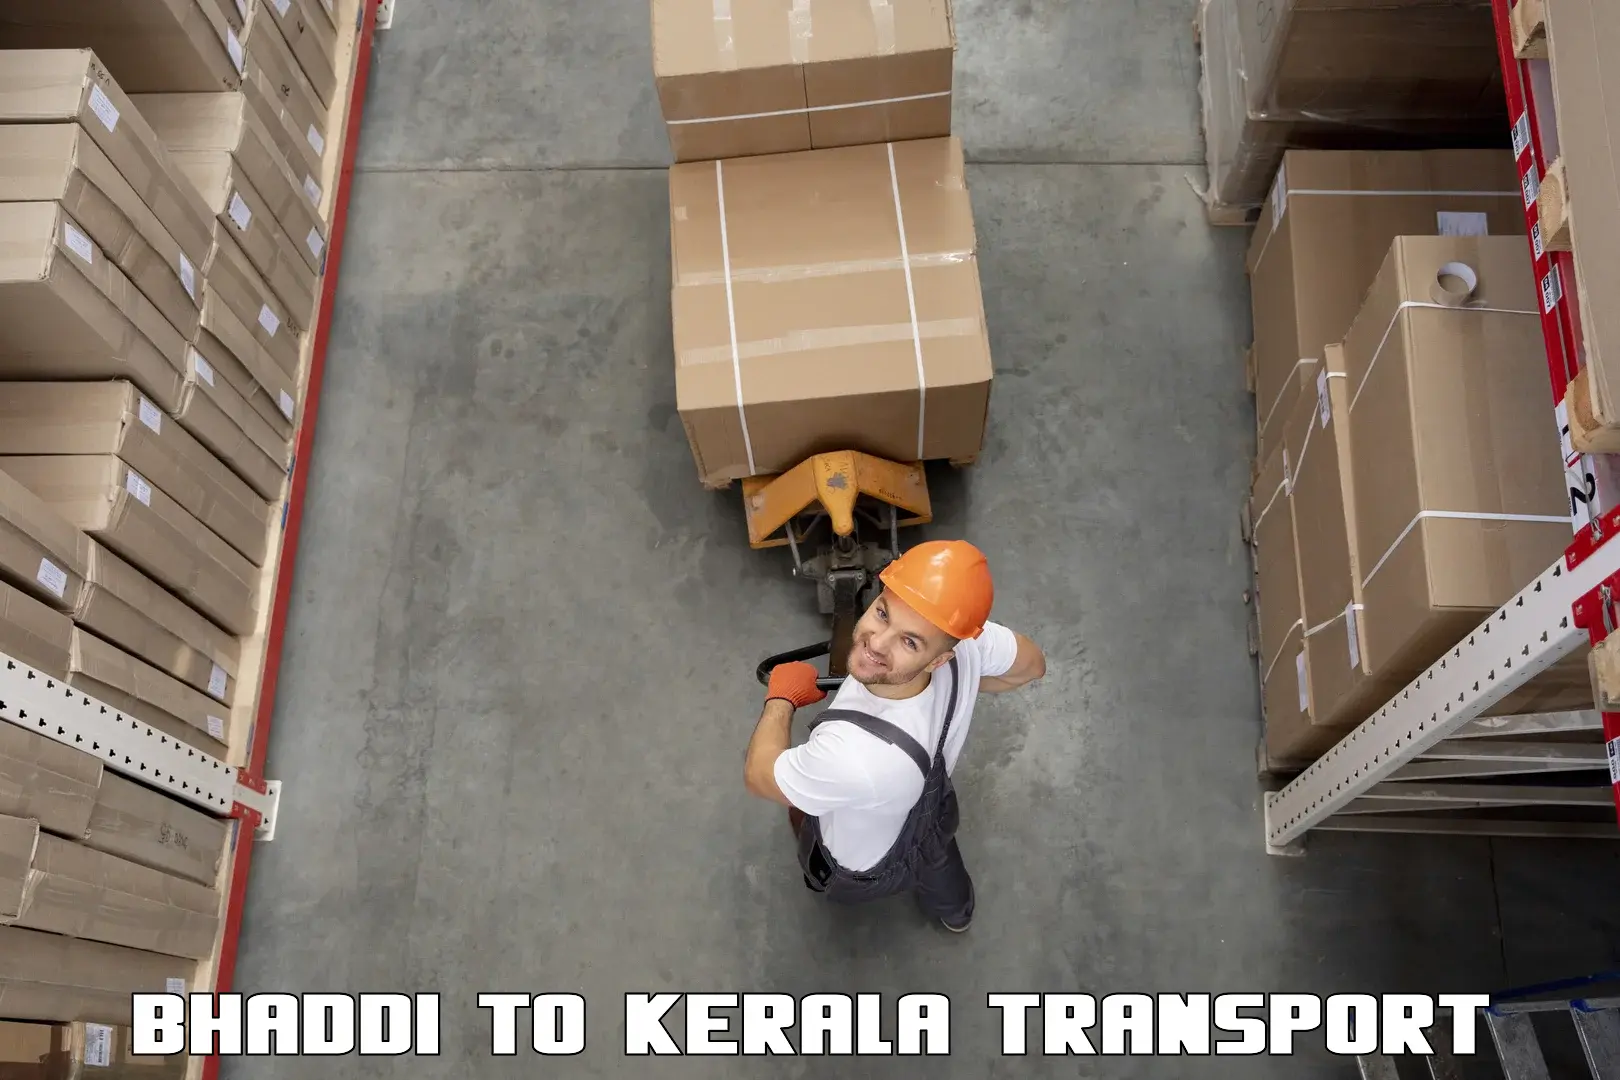 Air freight transport services Bhaddi to Ranni